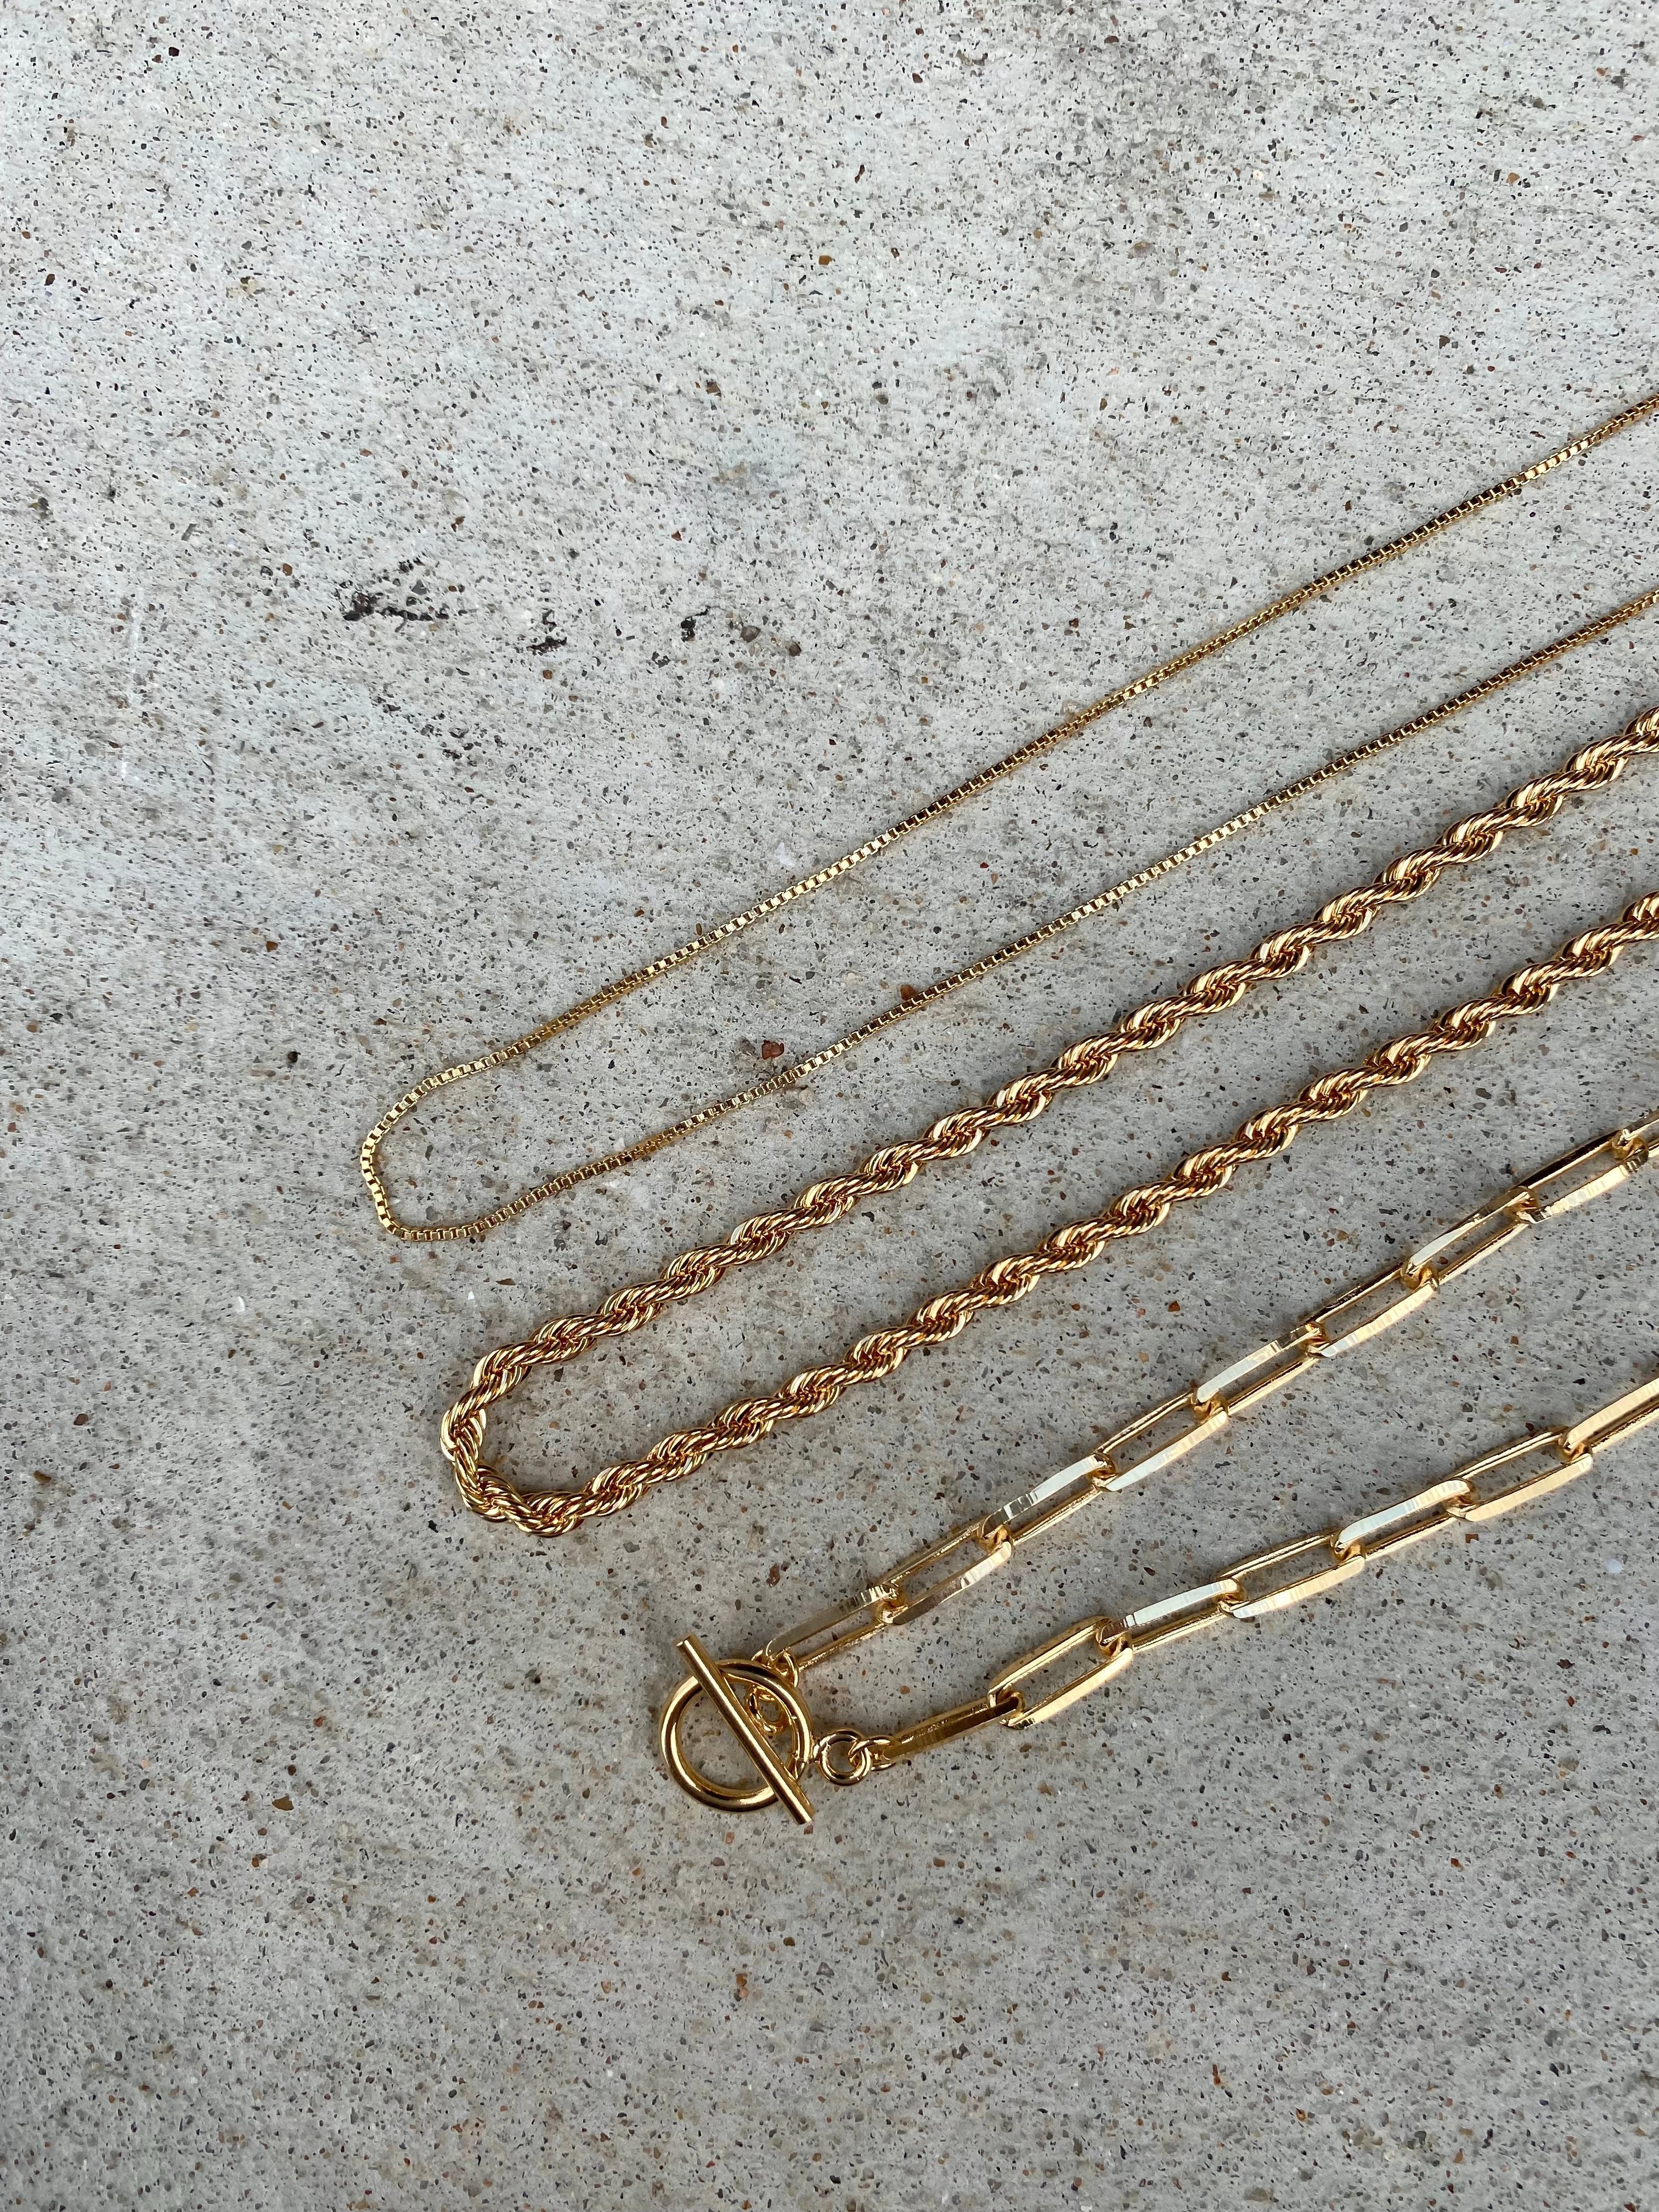 chunky paperclip chain, thick paperclip chain, thick necklace, statement necklace, chunky necklace, gold chunky necklace, link chain, paperclip necklace, paperclip chain, gold filled paperclip, gold filled layering necklace, gold filled necklace, wholesale jewelry, dainty jewelry store, dainty layering jewelry, gold necklace, statement necklace, statement chunky chain, thick gold chains, hypoallergenic jewelry, waterproof chains, water resistant necklaces, water resistant jewelry